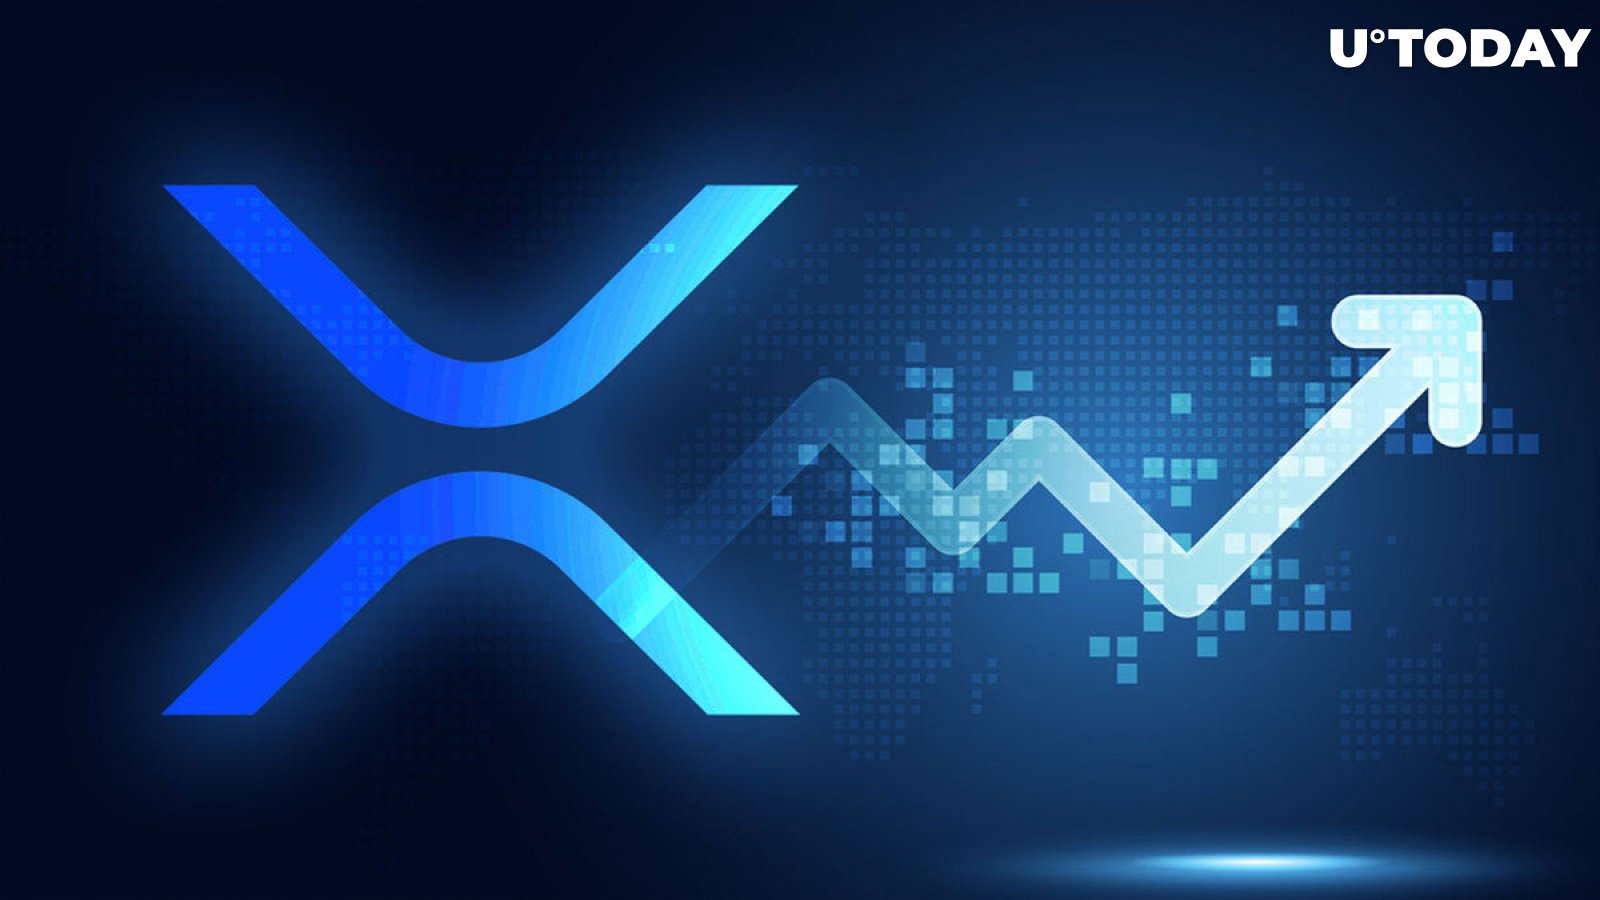 XRP Prints 7-Day High to Lead Altcoin Growth